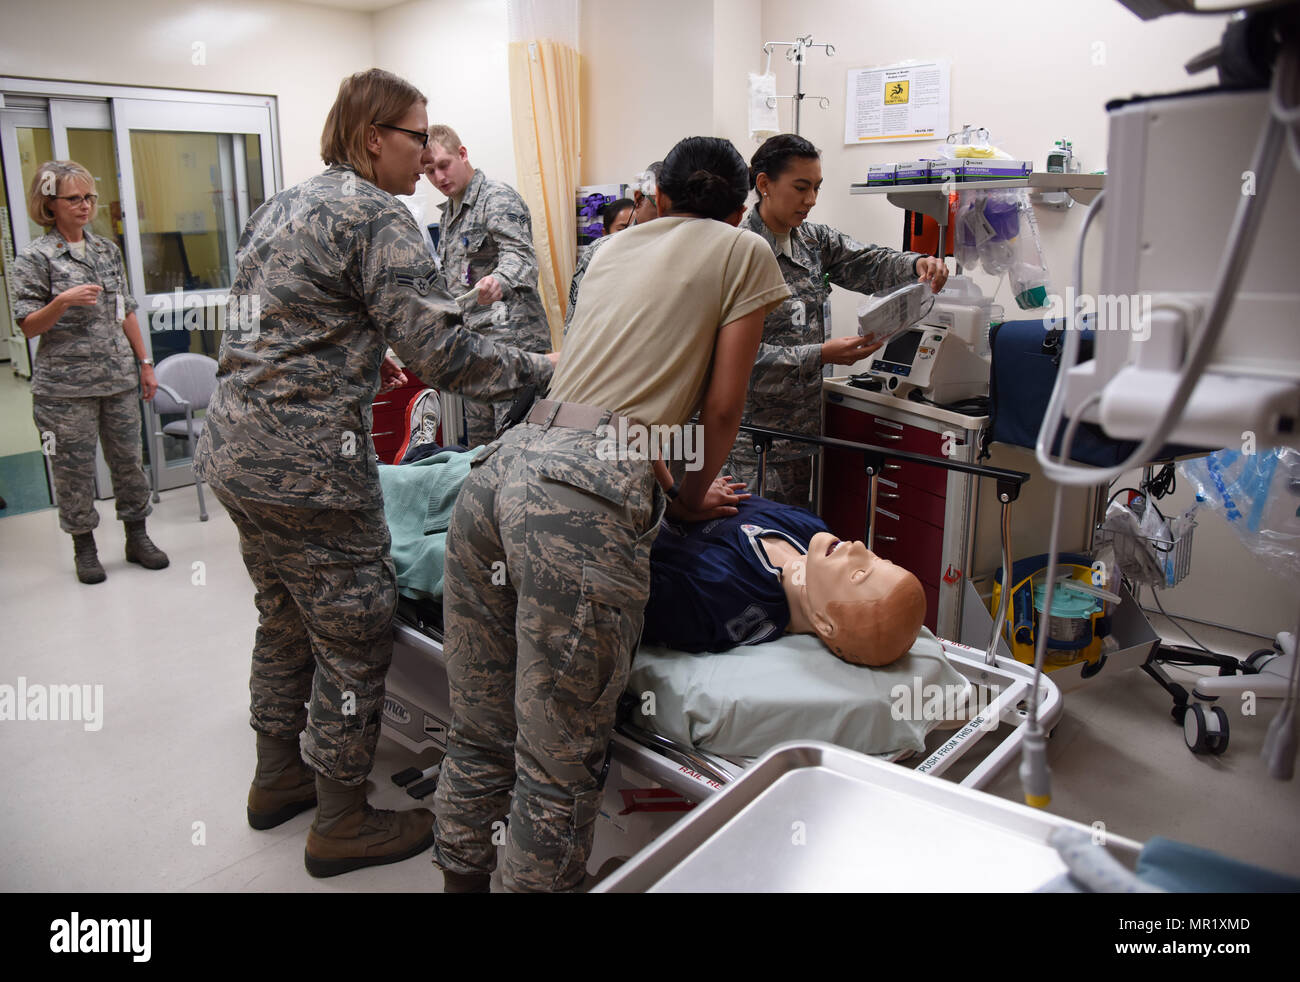 Members of the 81st Medical Operations Squadron participate in a medical emergency scenario during Code Blue Thursday in the Keesler Medical Center emergency room April 27, 2017, on Keesler Air Force Base, Miss. Emergency room staff members coordinated with the simulation lab to use human patient simulators for running various advanced cardiac life support scenarios to improve Keesler’s new medical technicians’ skills and get them familiar with emergency equipment. (U.S. Air Force photo by Kemberly Groue) Stock Photo